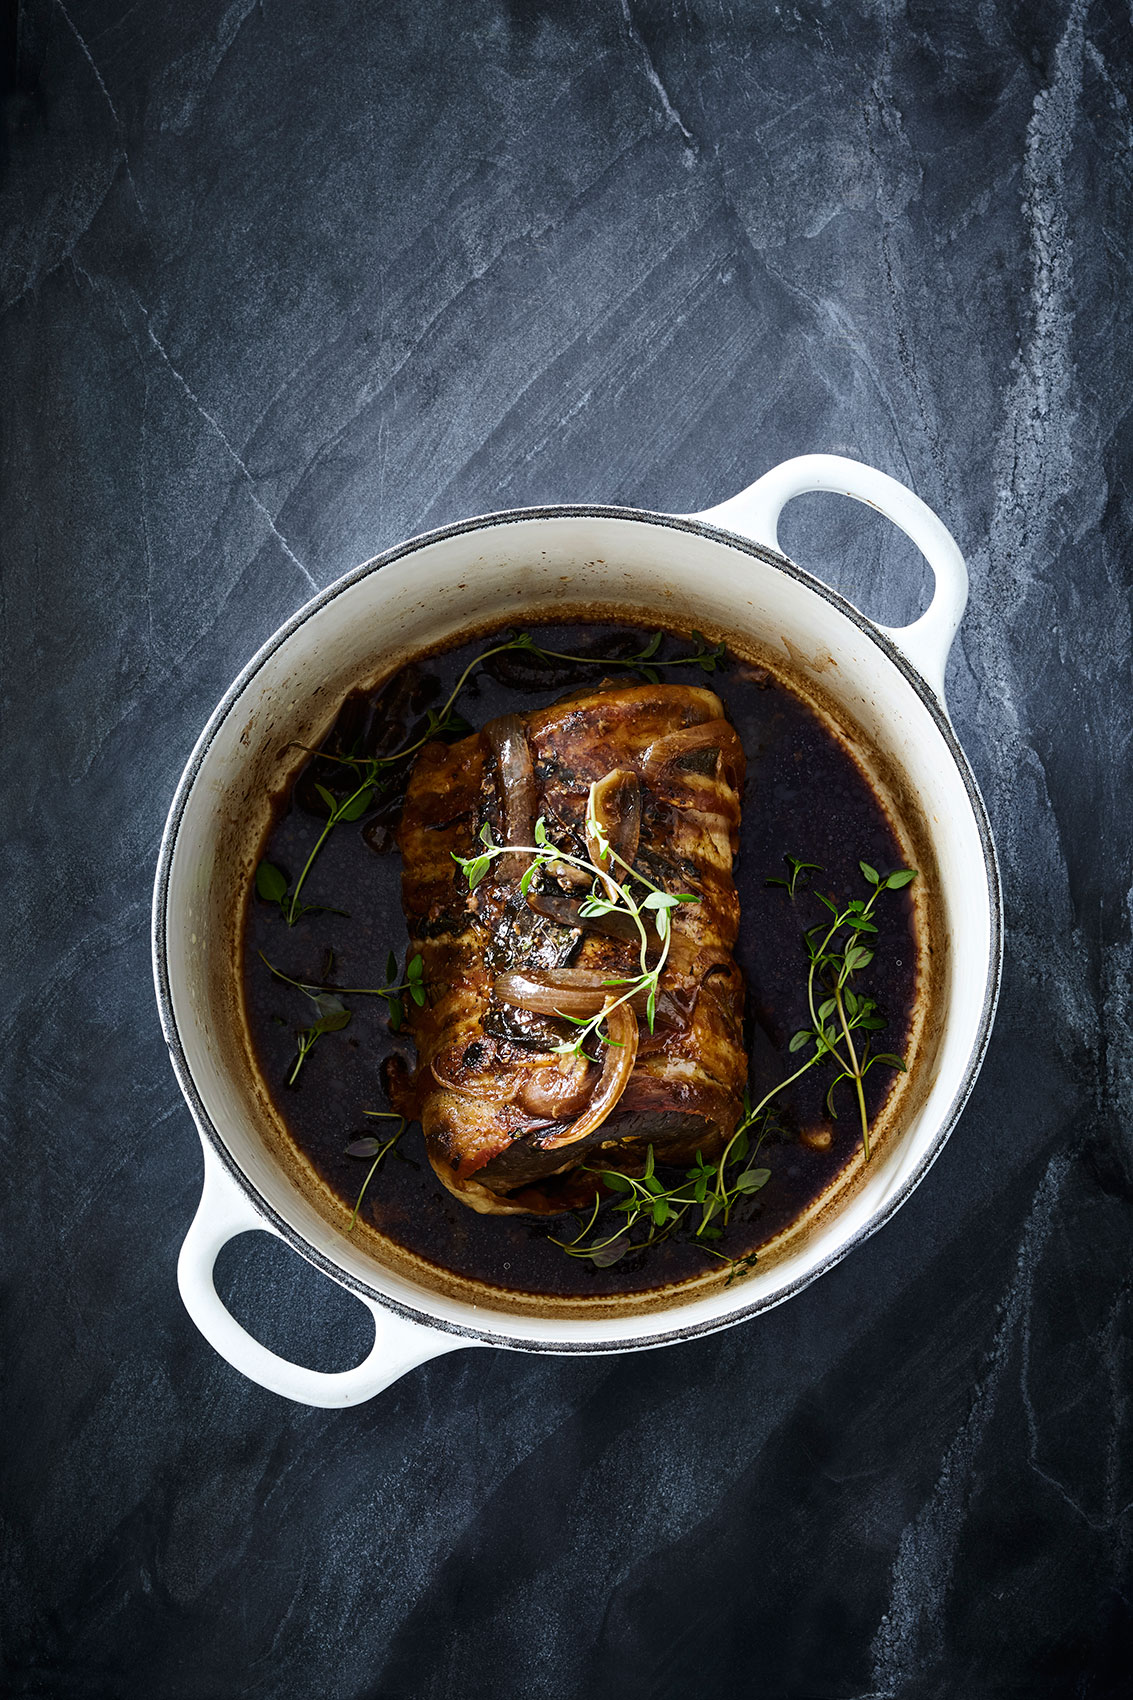 Slow Cooked • Braised Beef Brisket with Fresh Thyme in Heavy Pot • Cookbook & Editorial Food Photography